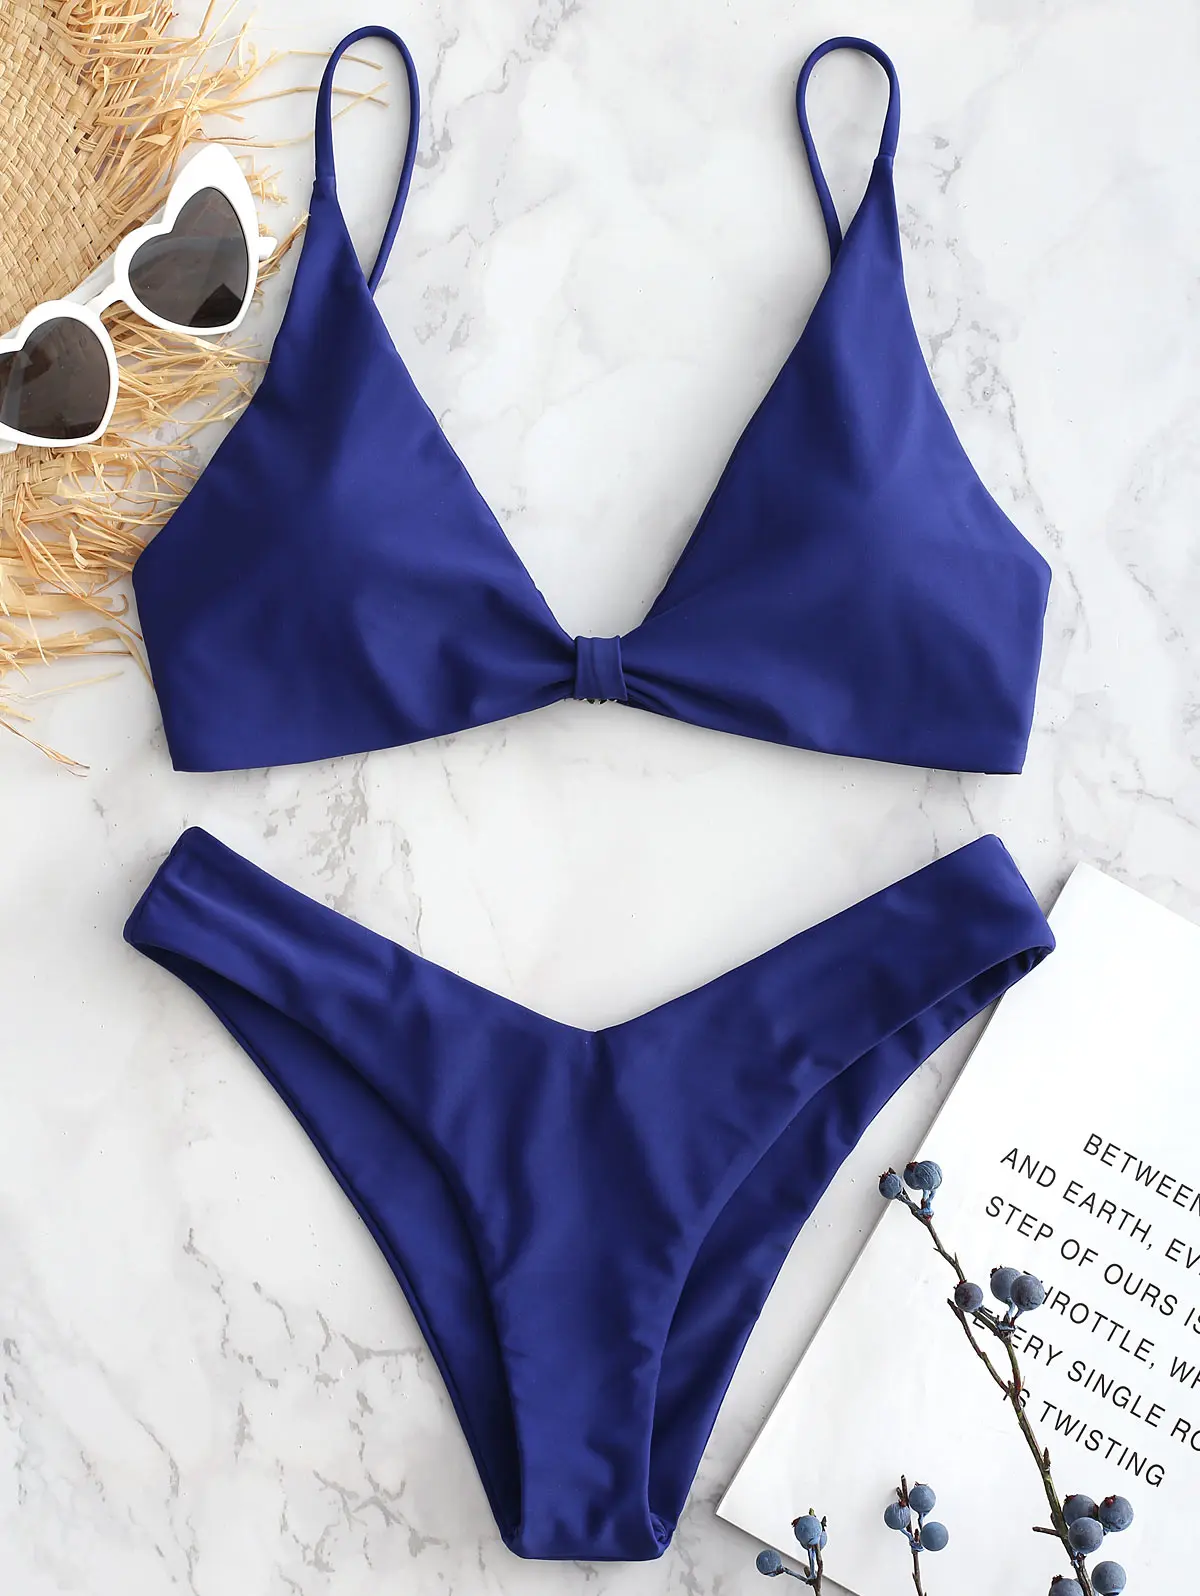 

ZAFUL Knotted Low Rise Cami Bikini Set Women Low Waisted Two Pieces Swimsuit Padded Solid Bathing Suit 2020 Summer Swimwear